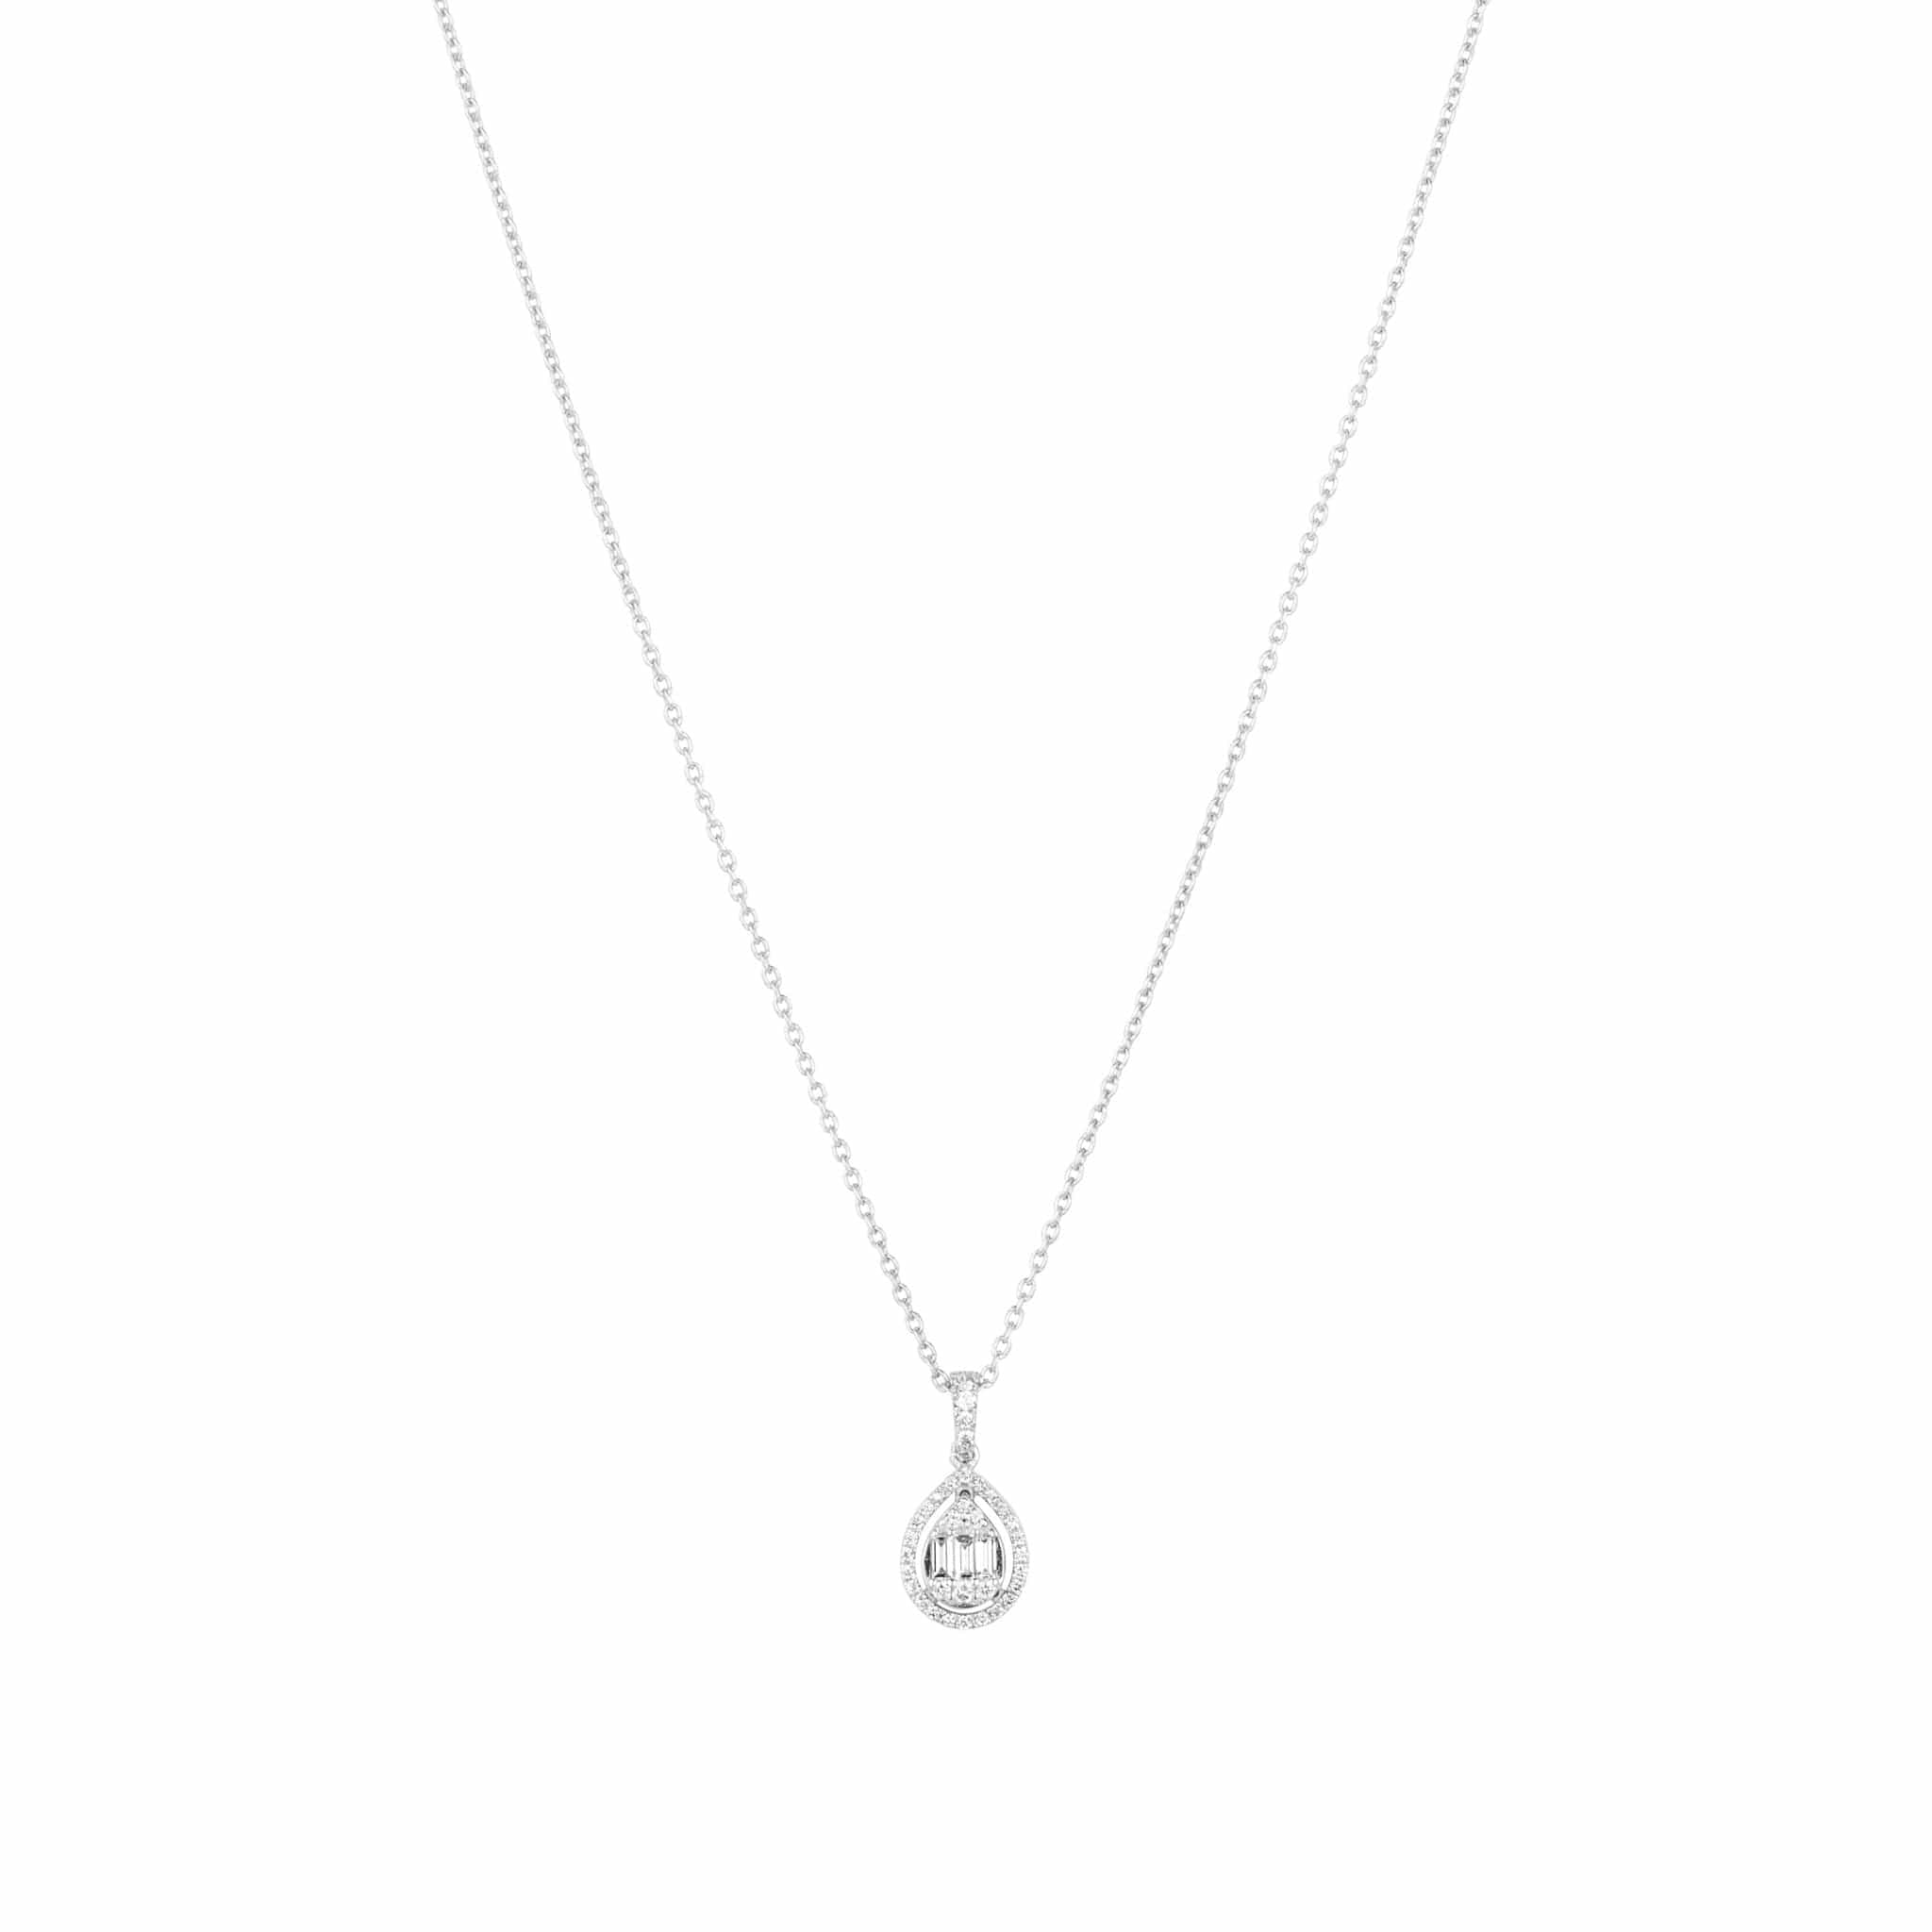 Diamond halo necklace and chain